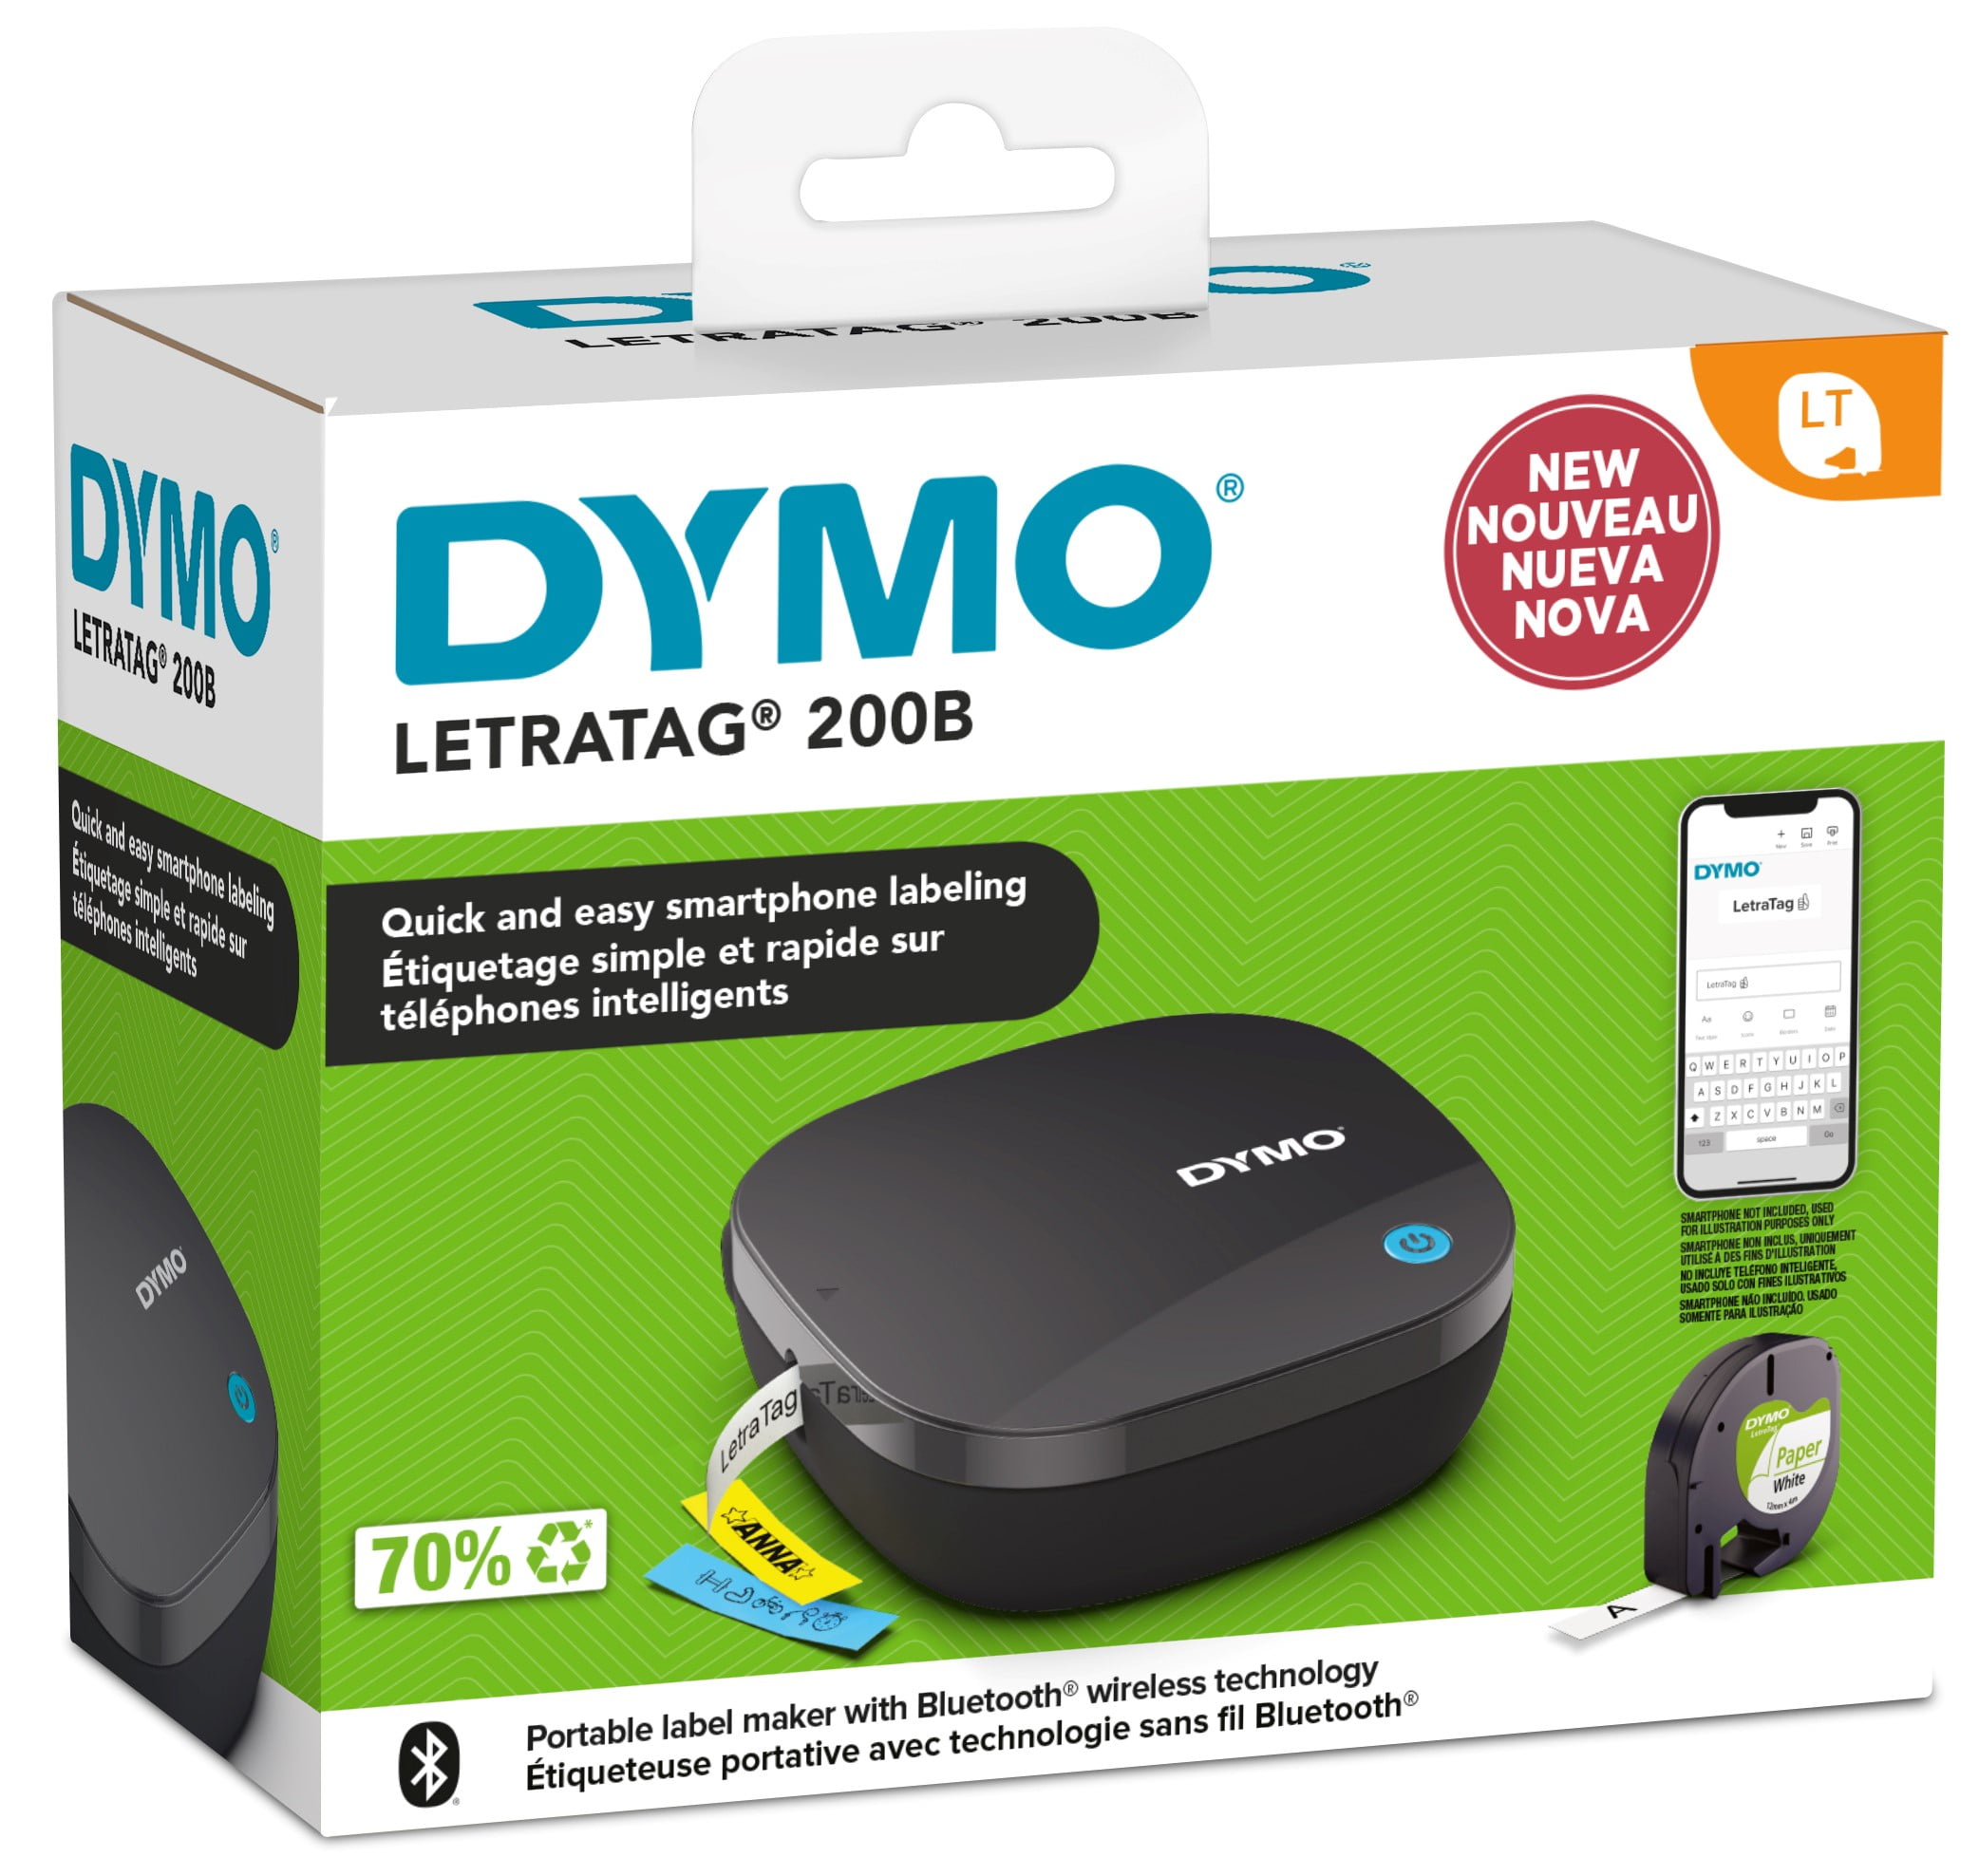 DYMO Label Maker with 2 D1 DYMO Label Tapes | LabelManager 160 Portable  Label Maker, QWERTY Keyboard, One-Touch Smart Keys, Easy-to-Use, for Home 